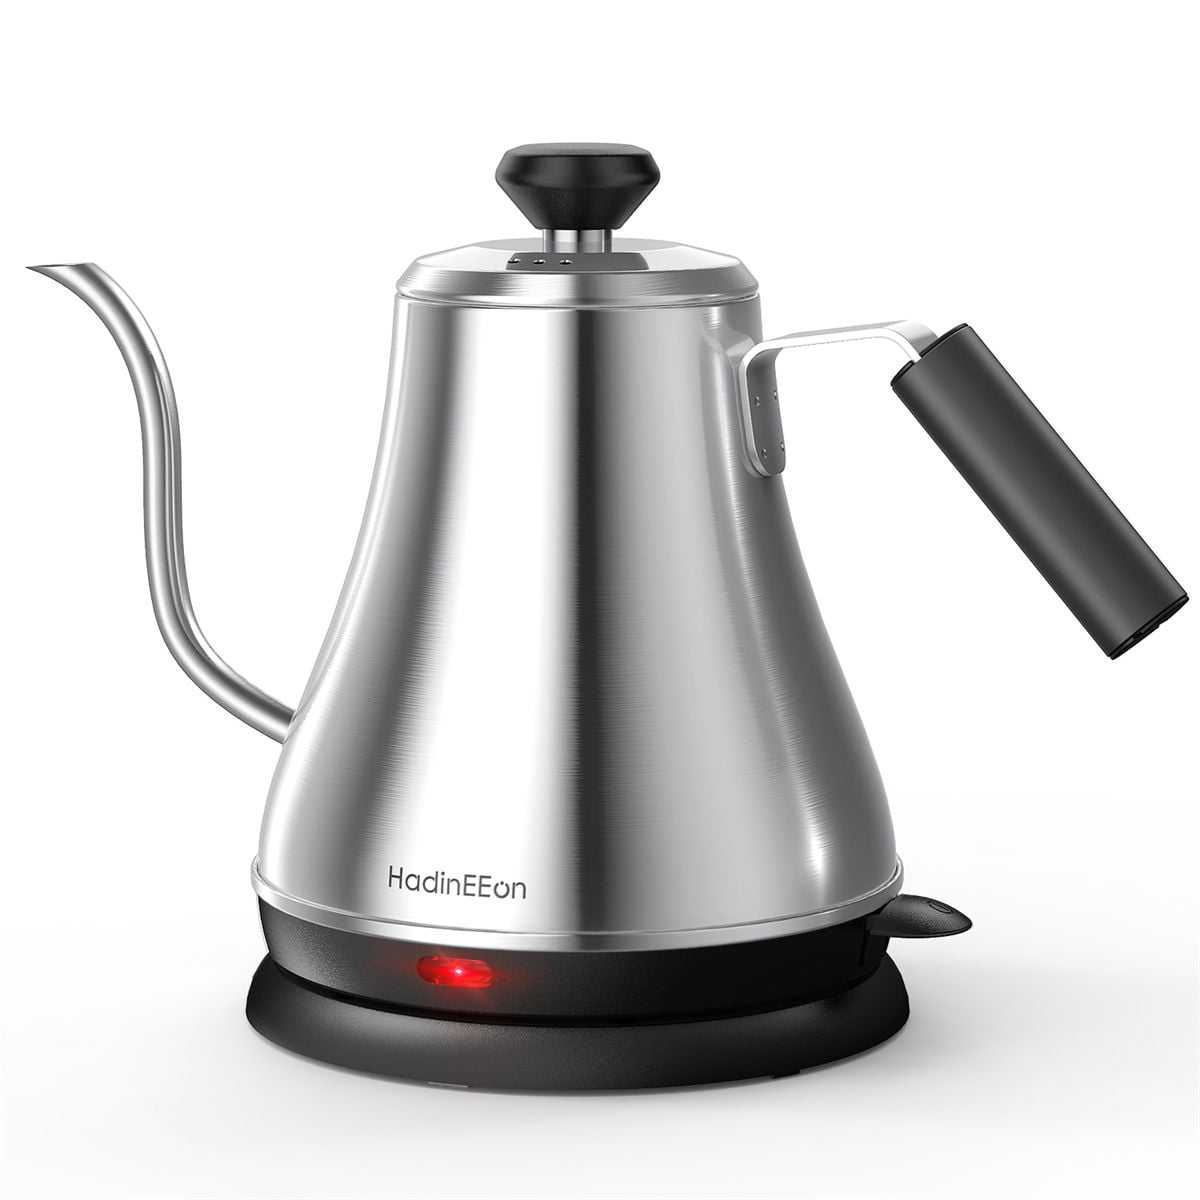 Giligiliso Clearance Electric Kettle Gooseneck Kettle, 800ml Water Kettle, Tea Pot Stainless Steel for Coffee & Tea with Fast Heating, Auto-Shut Off